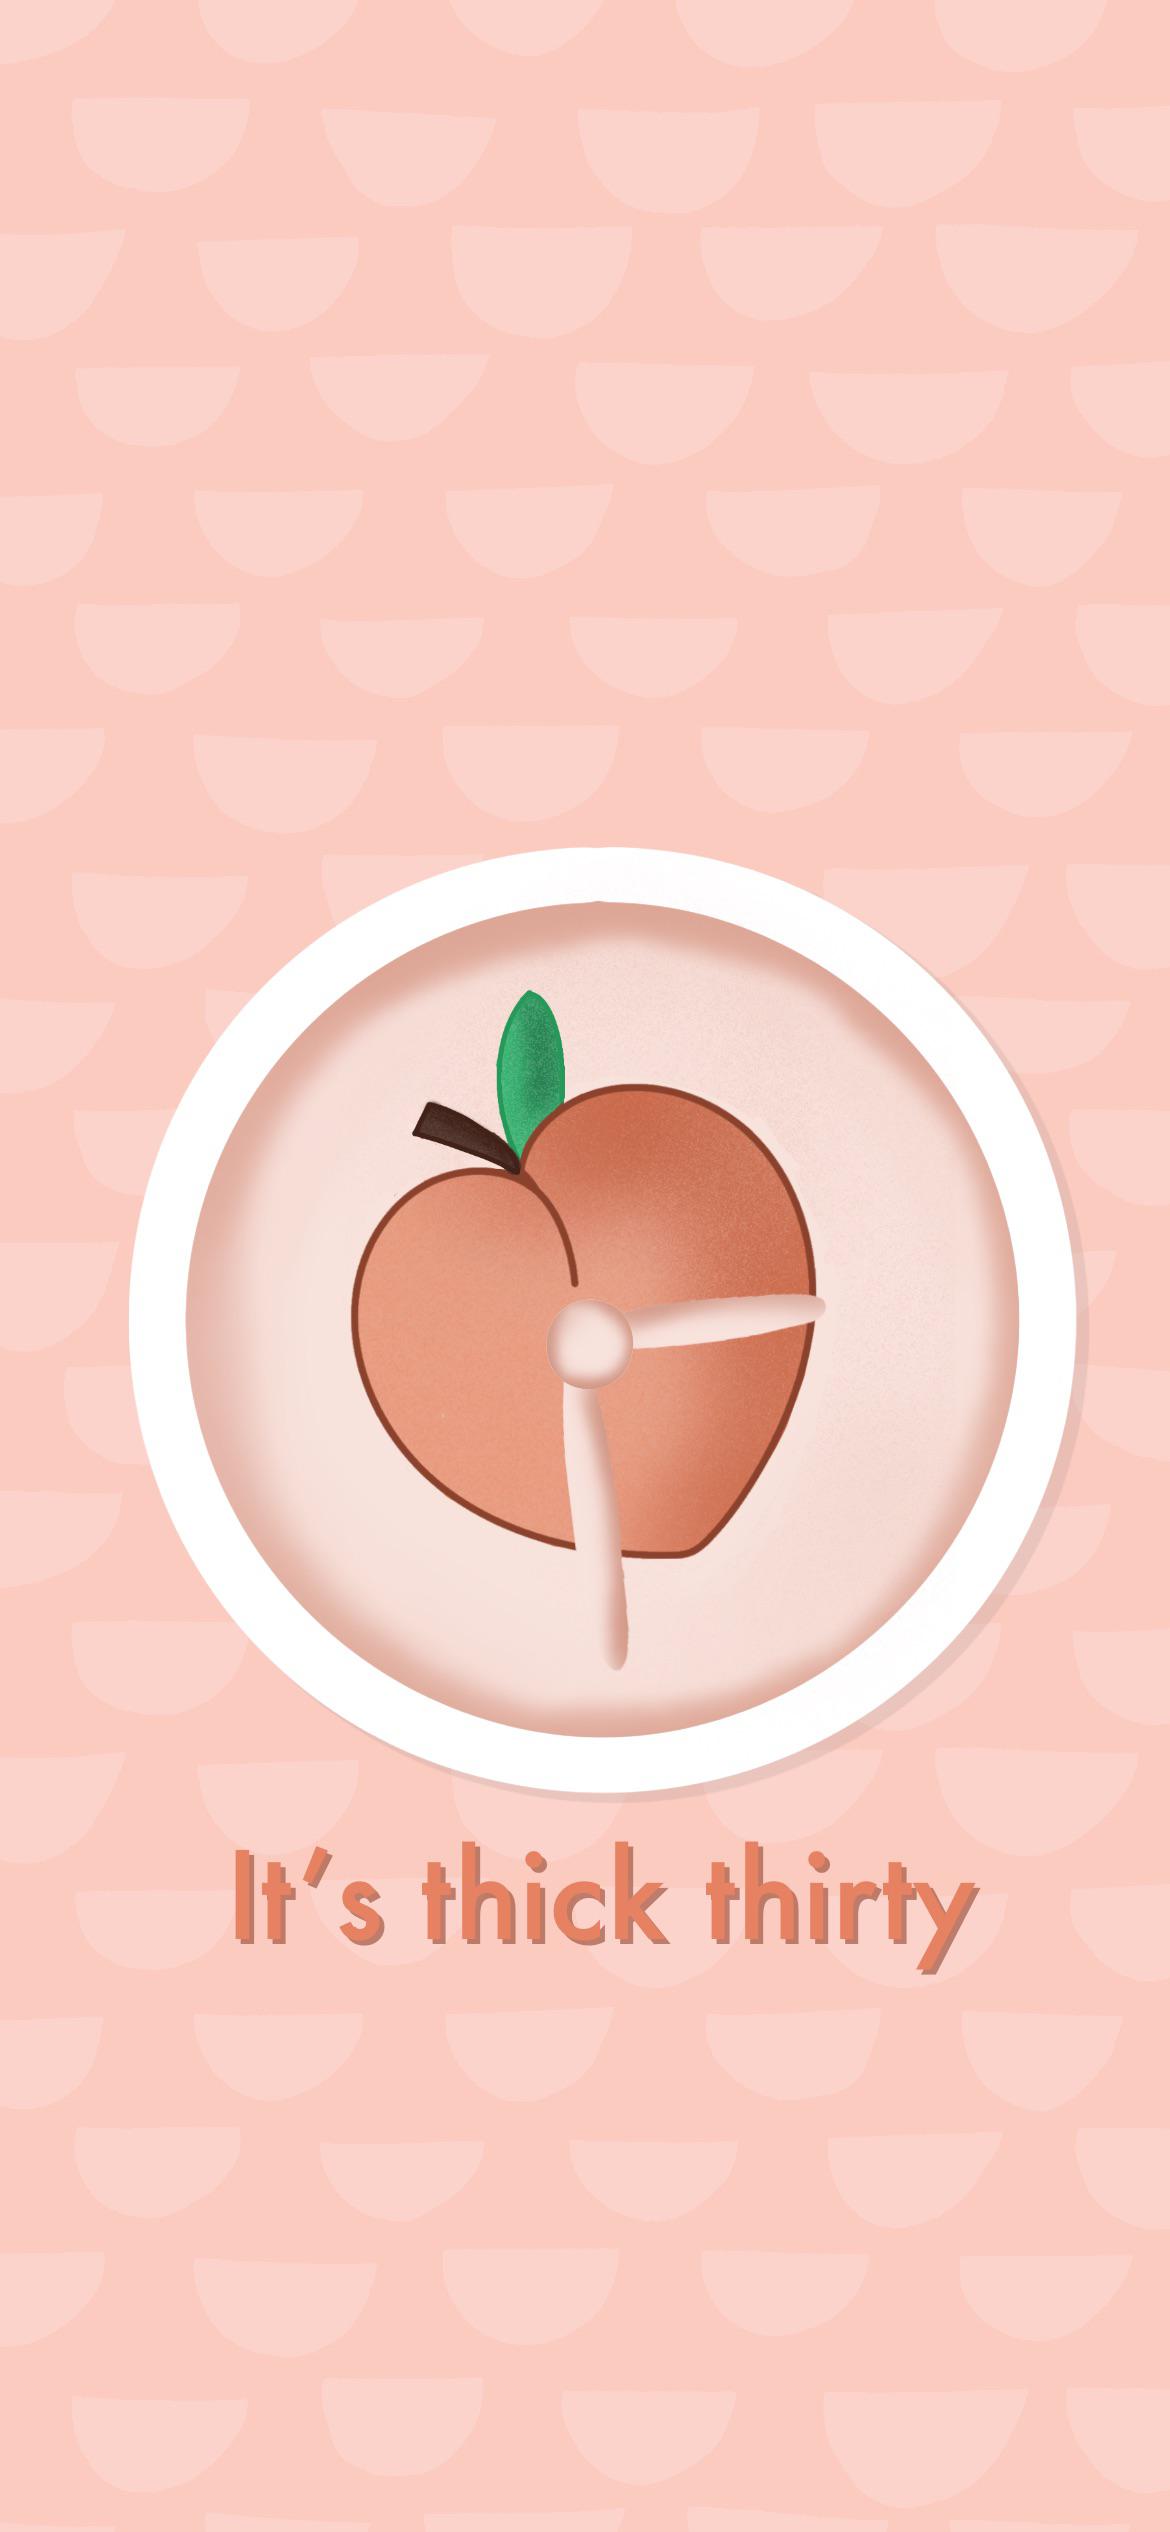 Peach Thirty iPhone Wallpaper in 1080x2340 resolution. You can use this wallpaper for your iPhone 8, iPhone 8 Plus, iPhone X, XS, XS Max, XR, iPhone SE. - Fruit